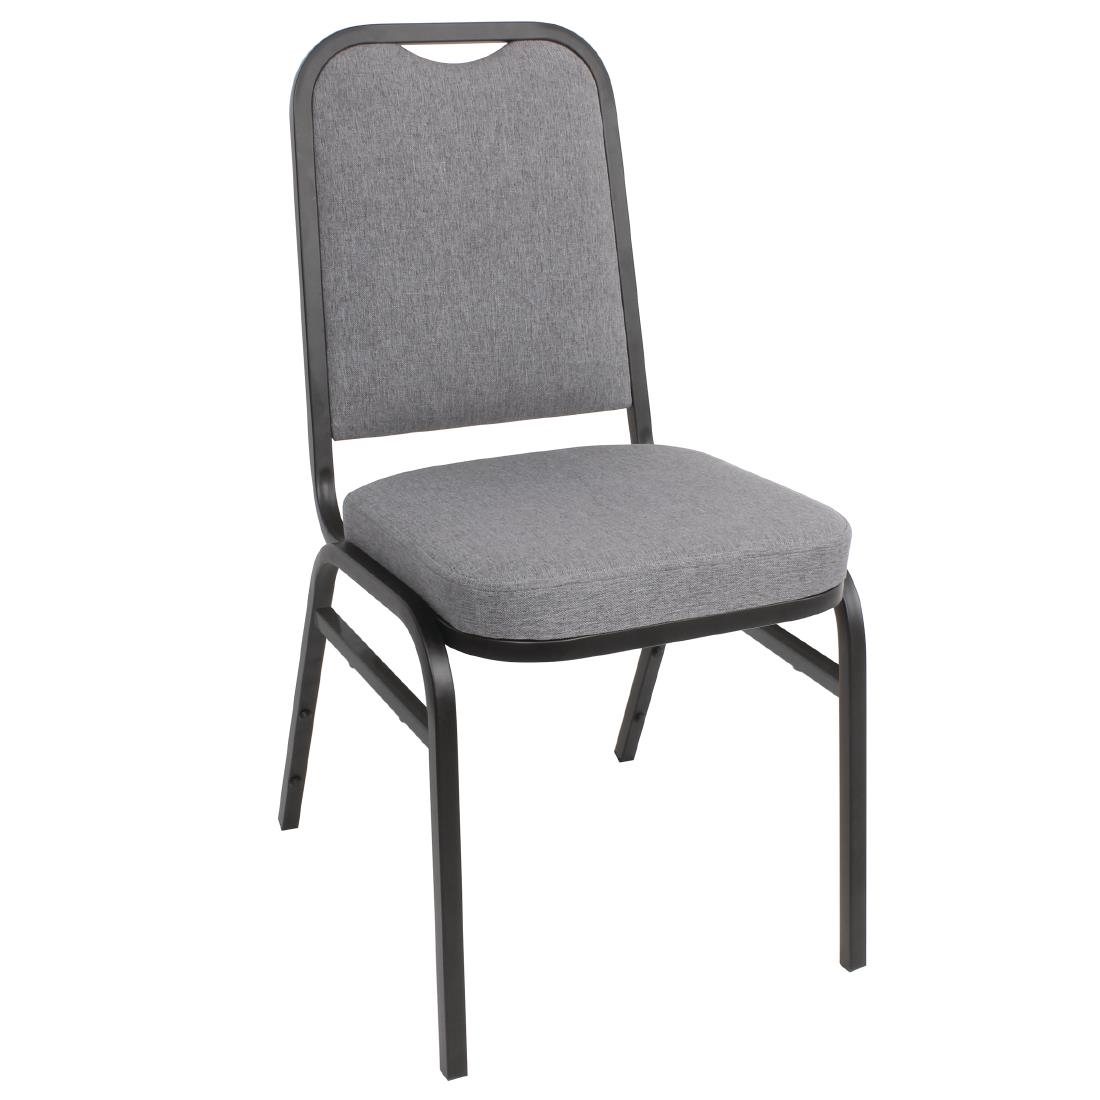 Square Banqueting Chair - Grey